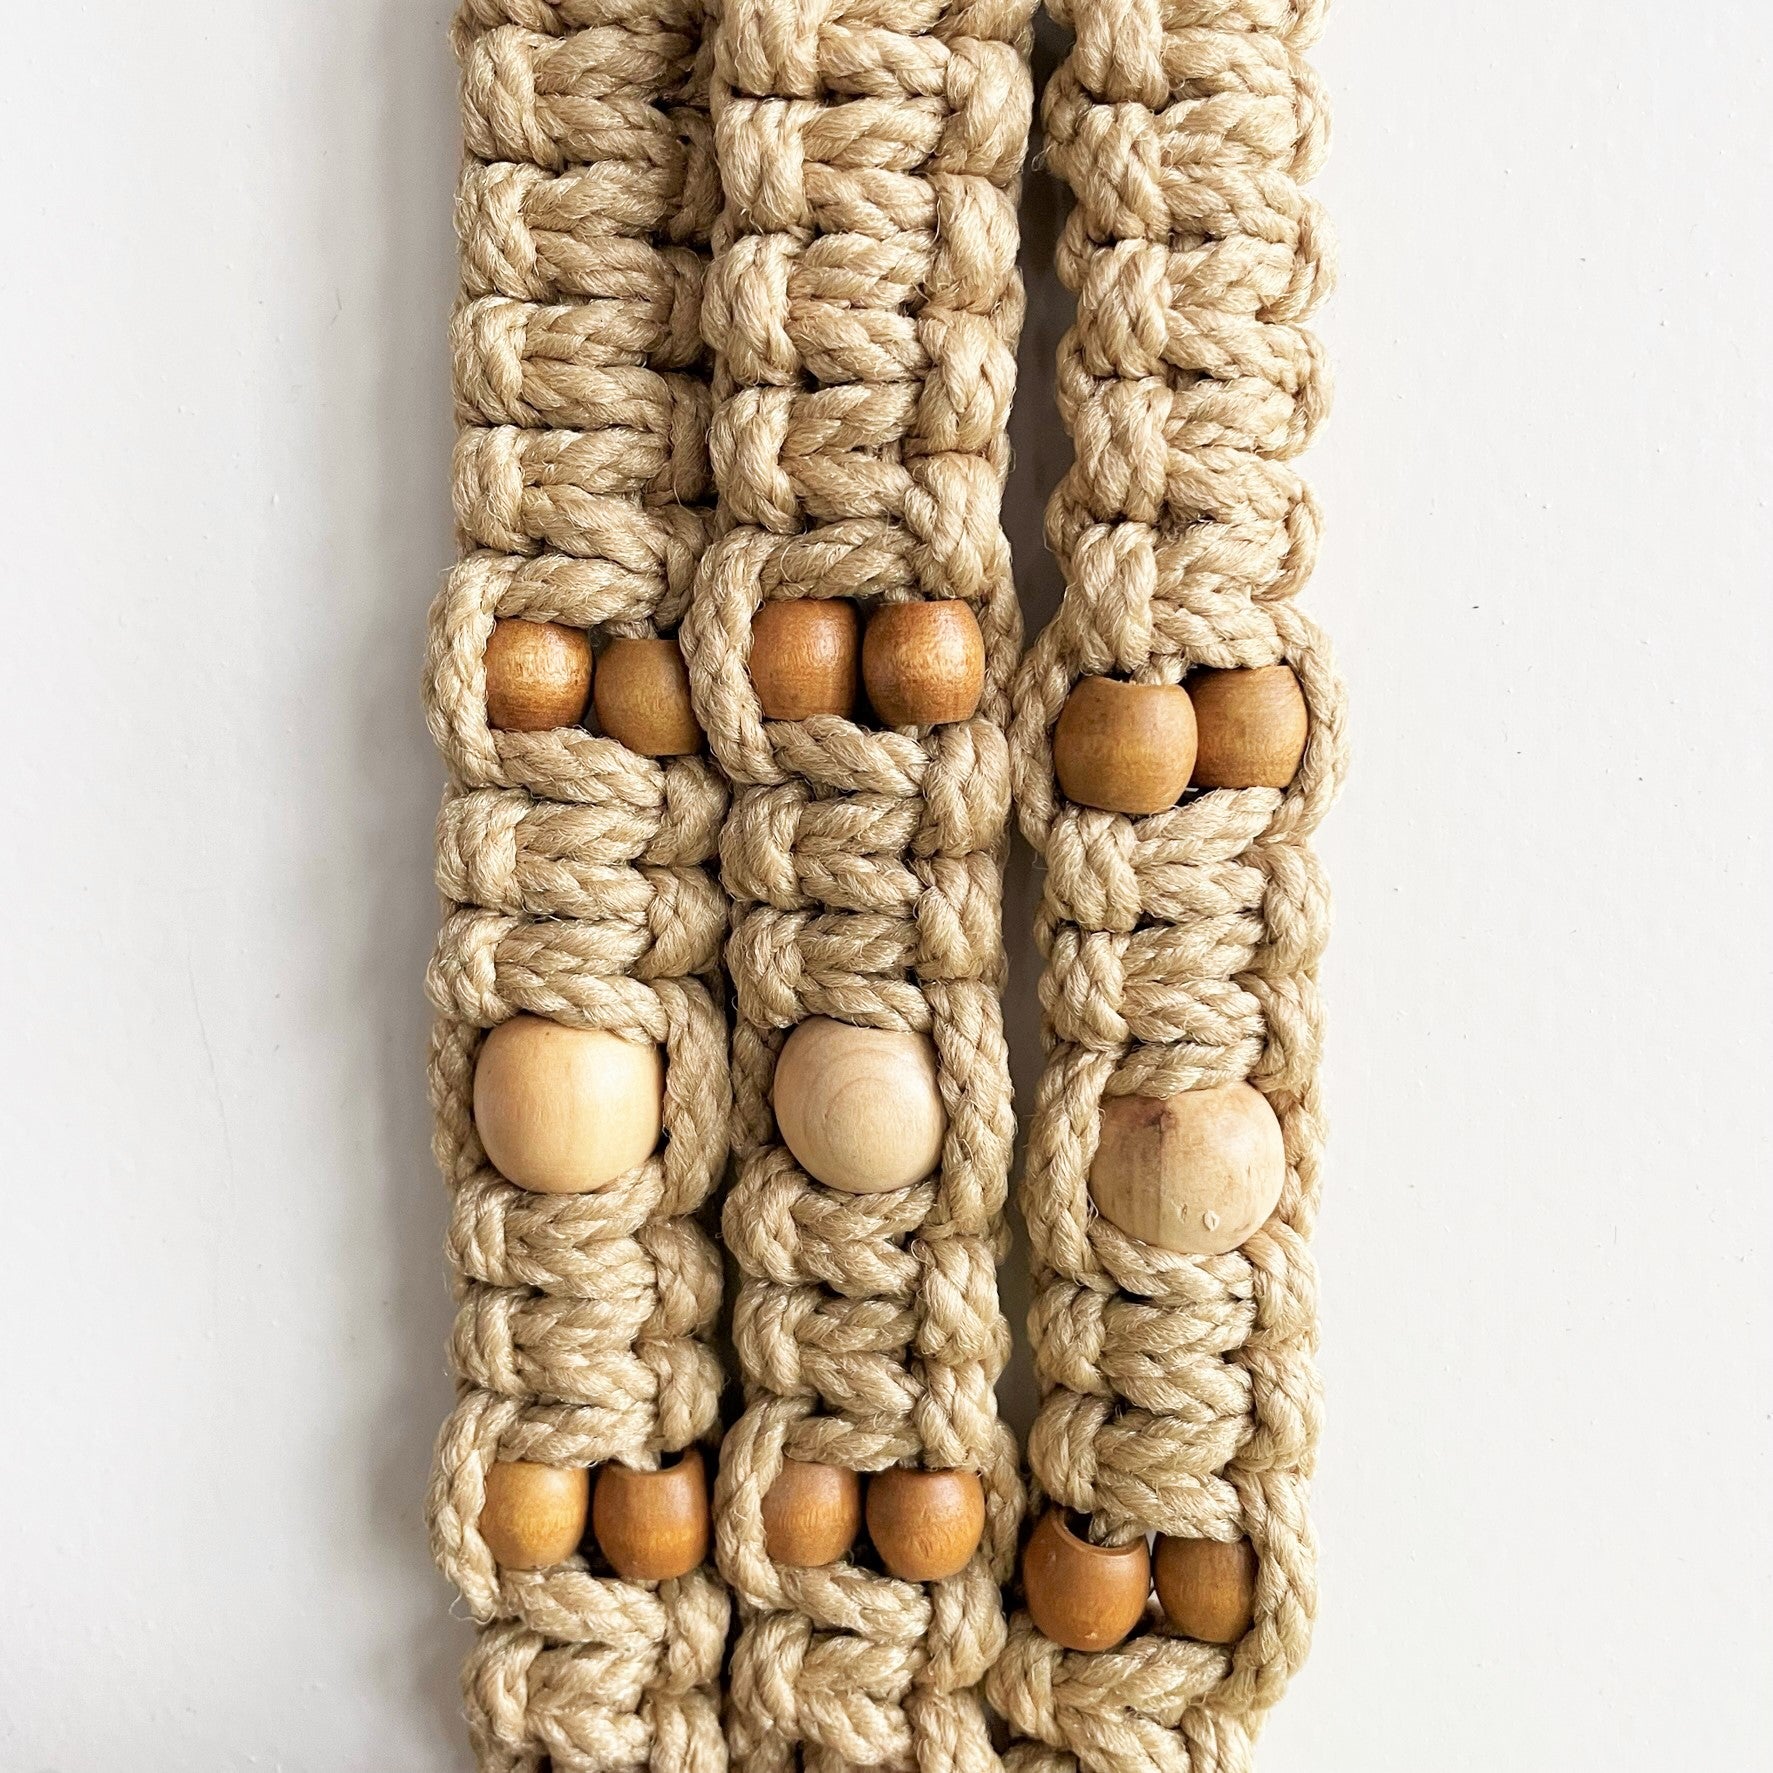 Twisted Sisters Beaded Macramé Plant Hanger